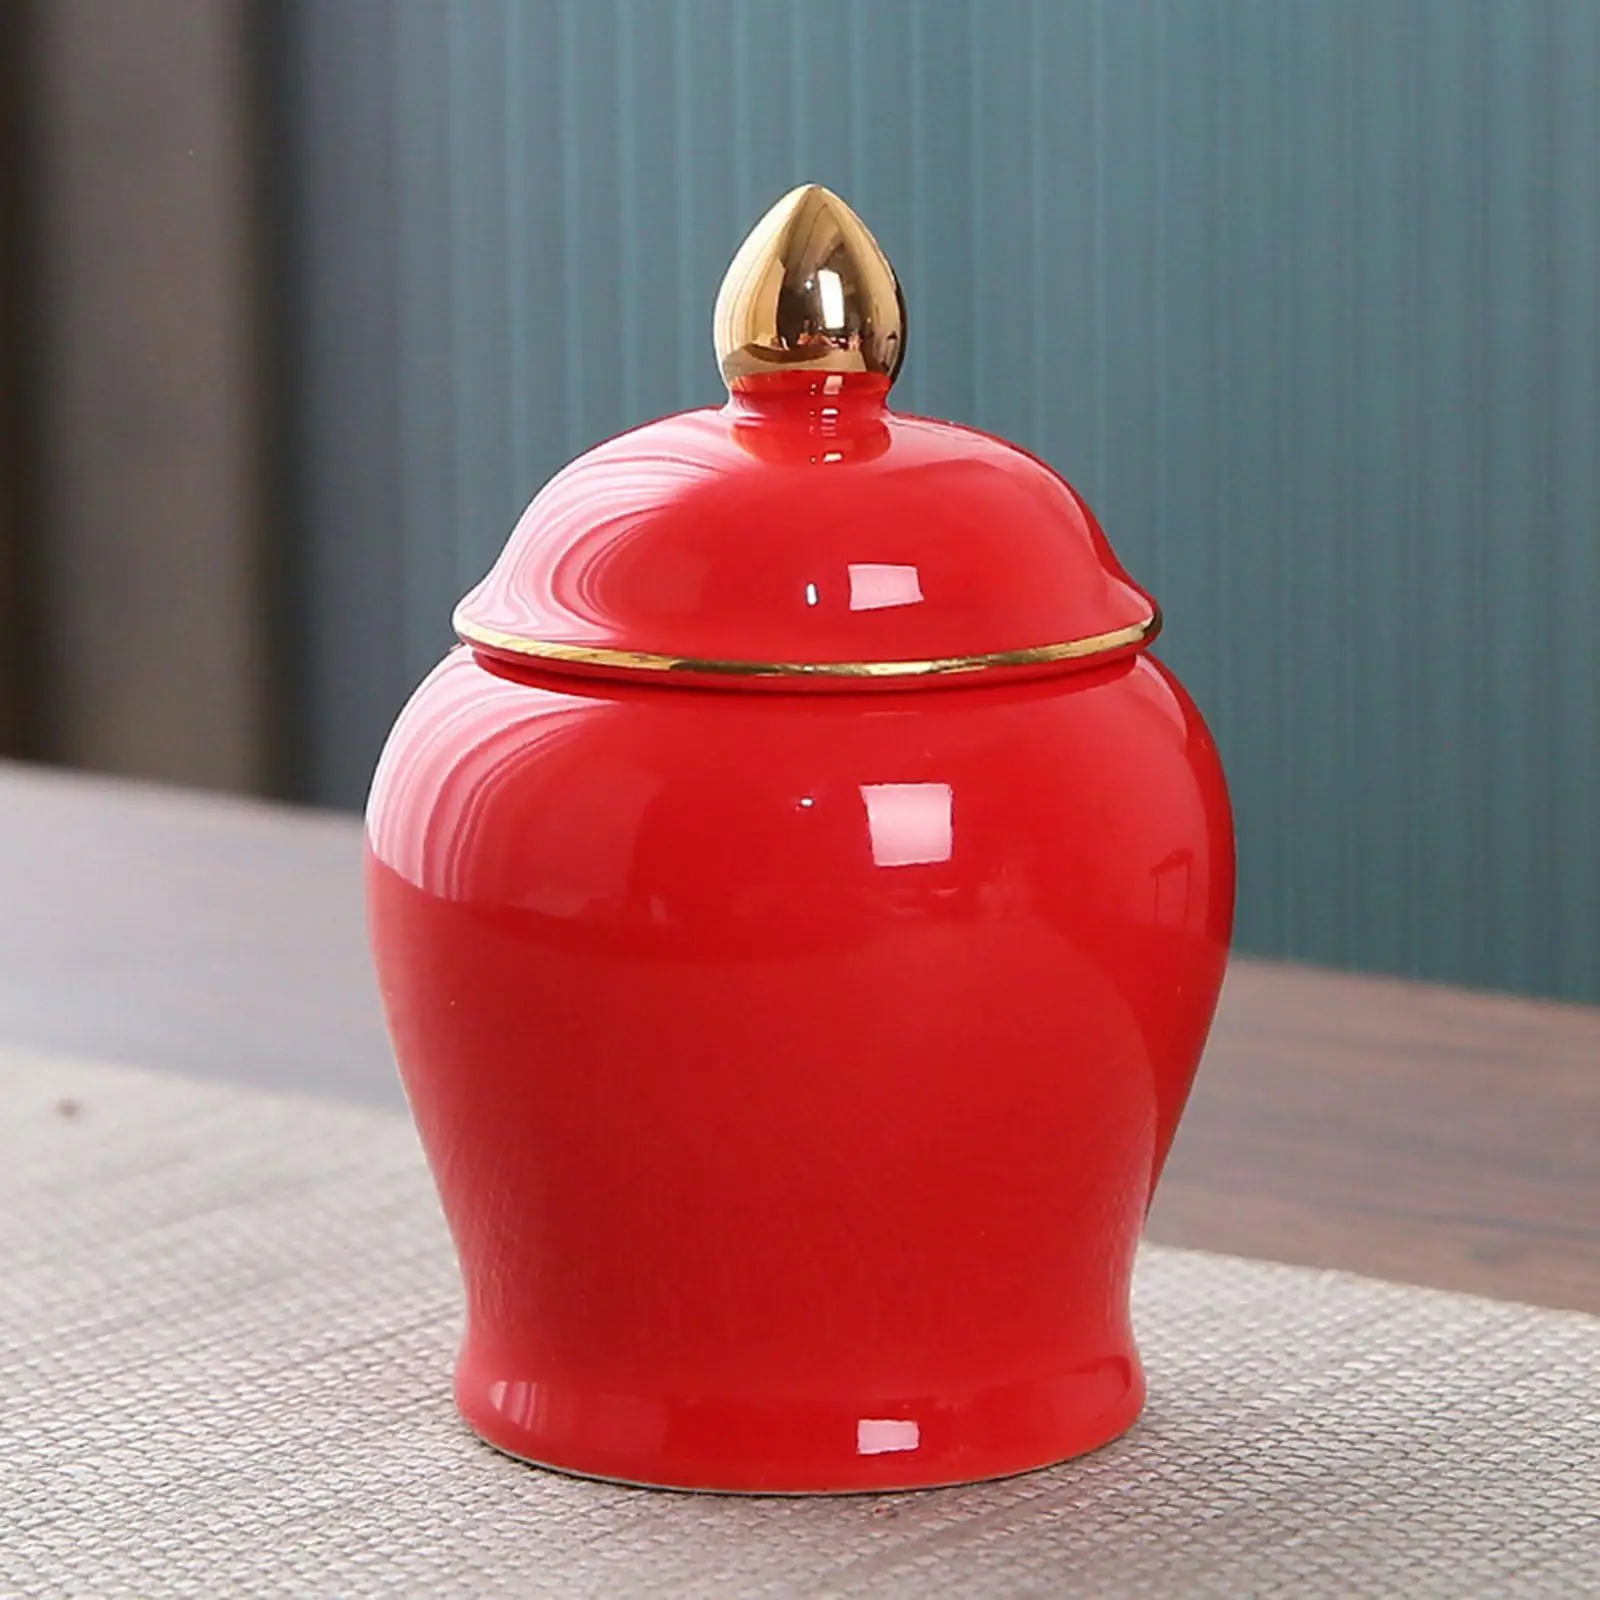 Small Ceramic Storage Jar Polished Tea Canister Decorative Jars Kitchen Canisters for Sugar Coffee Beans Seasoning Salt